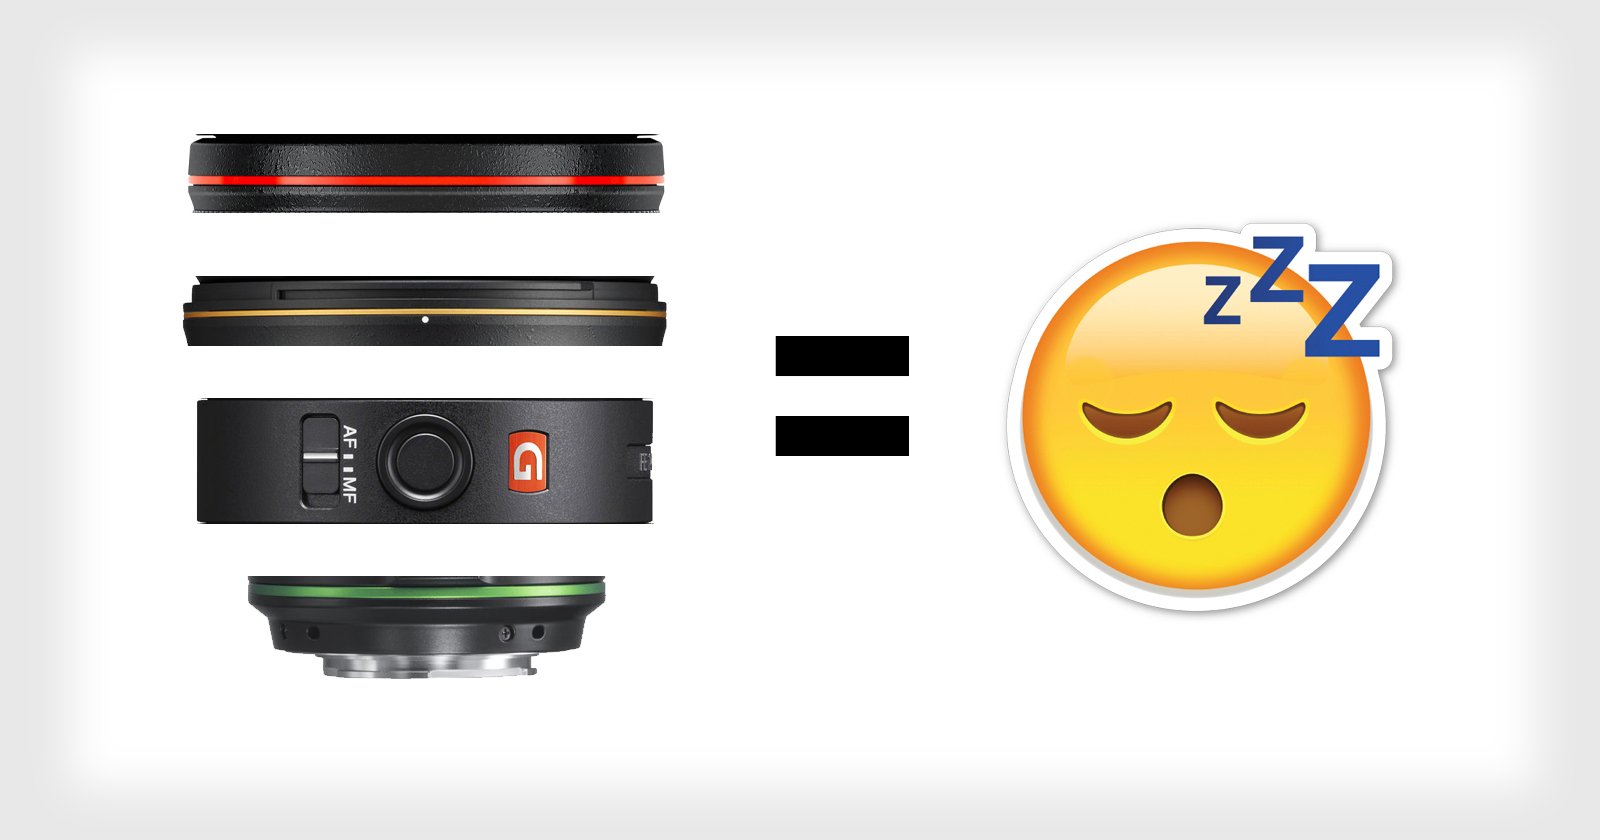 Perfect is Boring: Lens Makers Need to Loosen Up and Have Fun